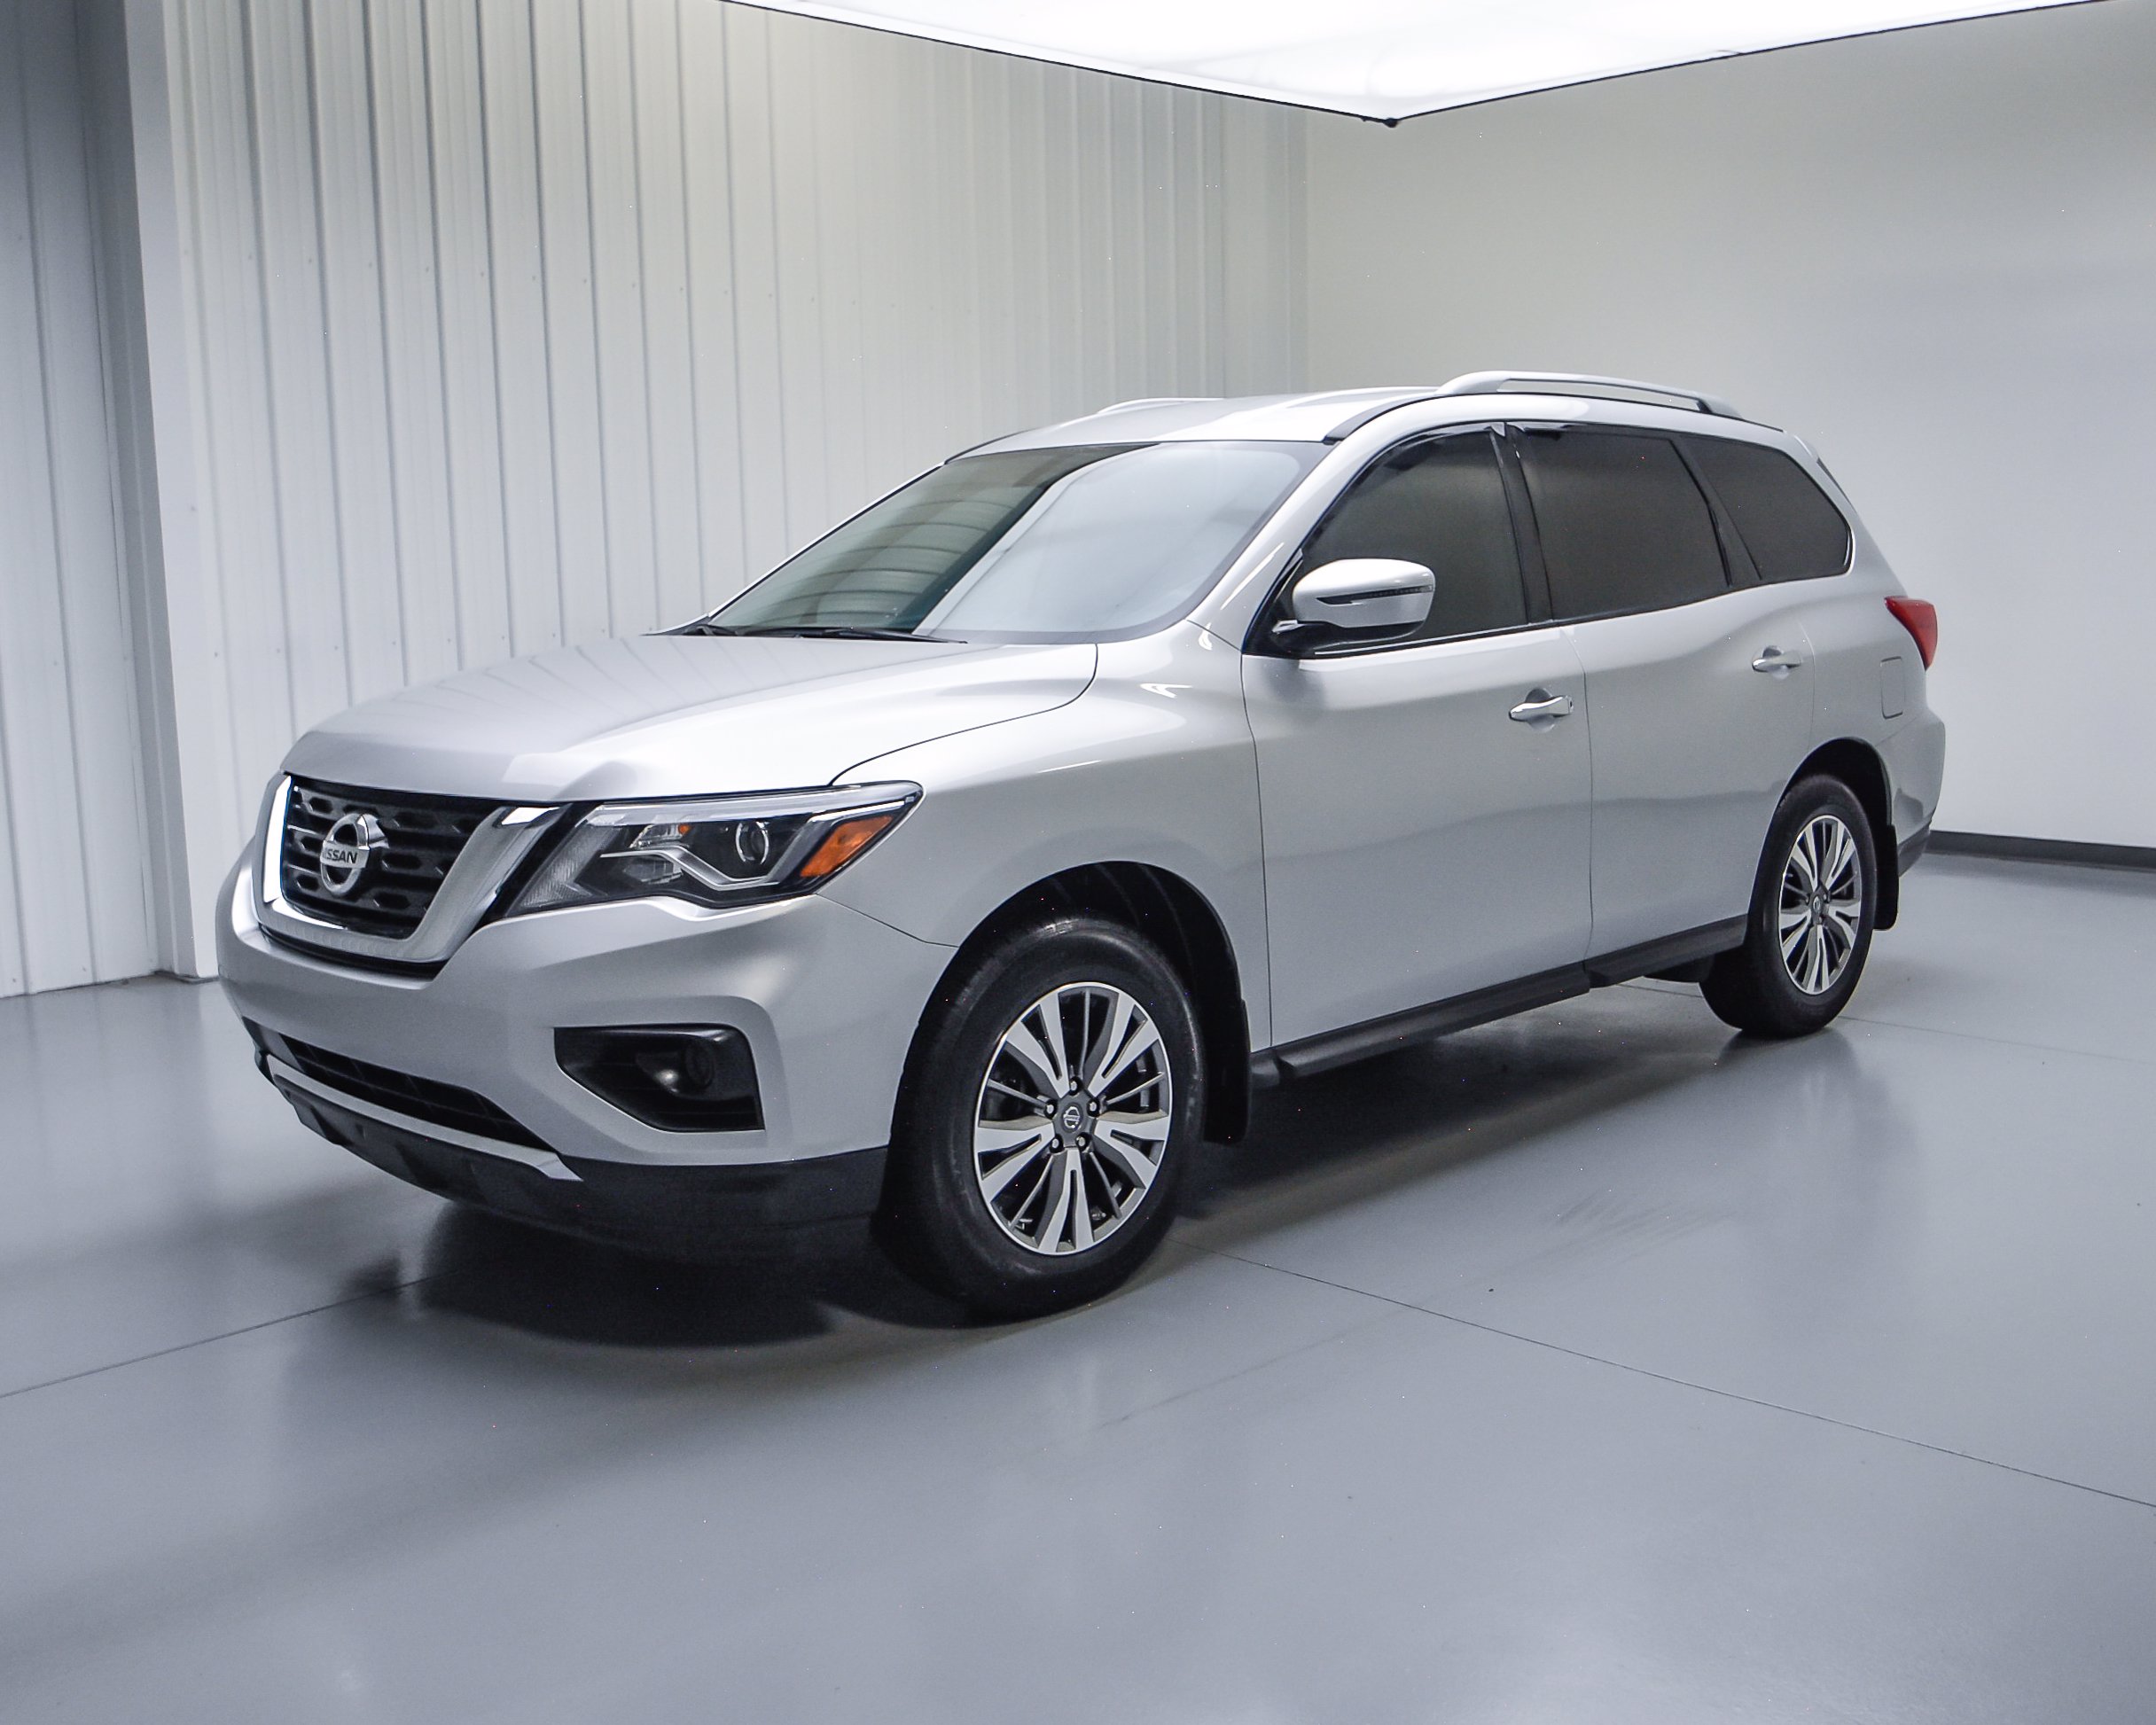 PreOwned 2018 Nissan Pathfinder S 4WD Sport Utility